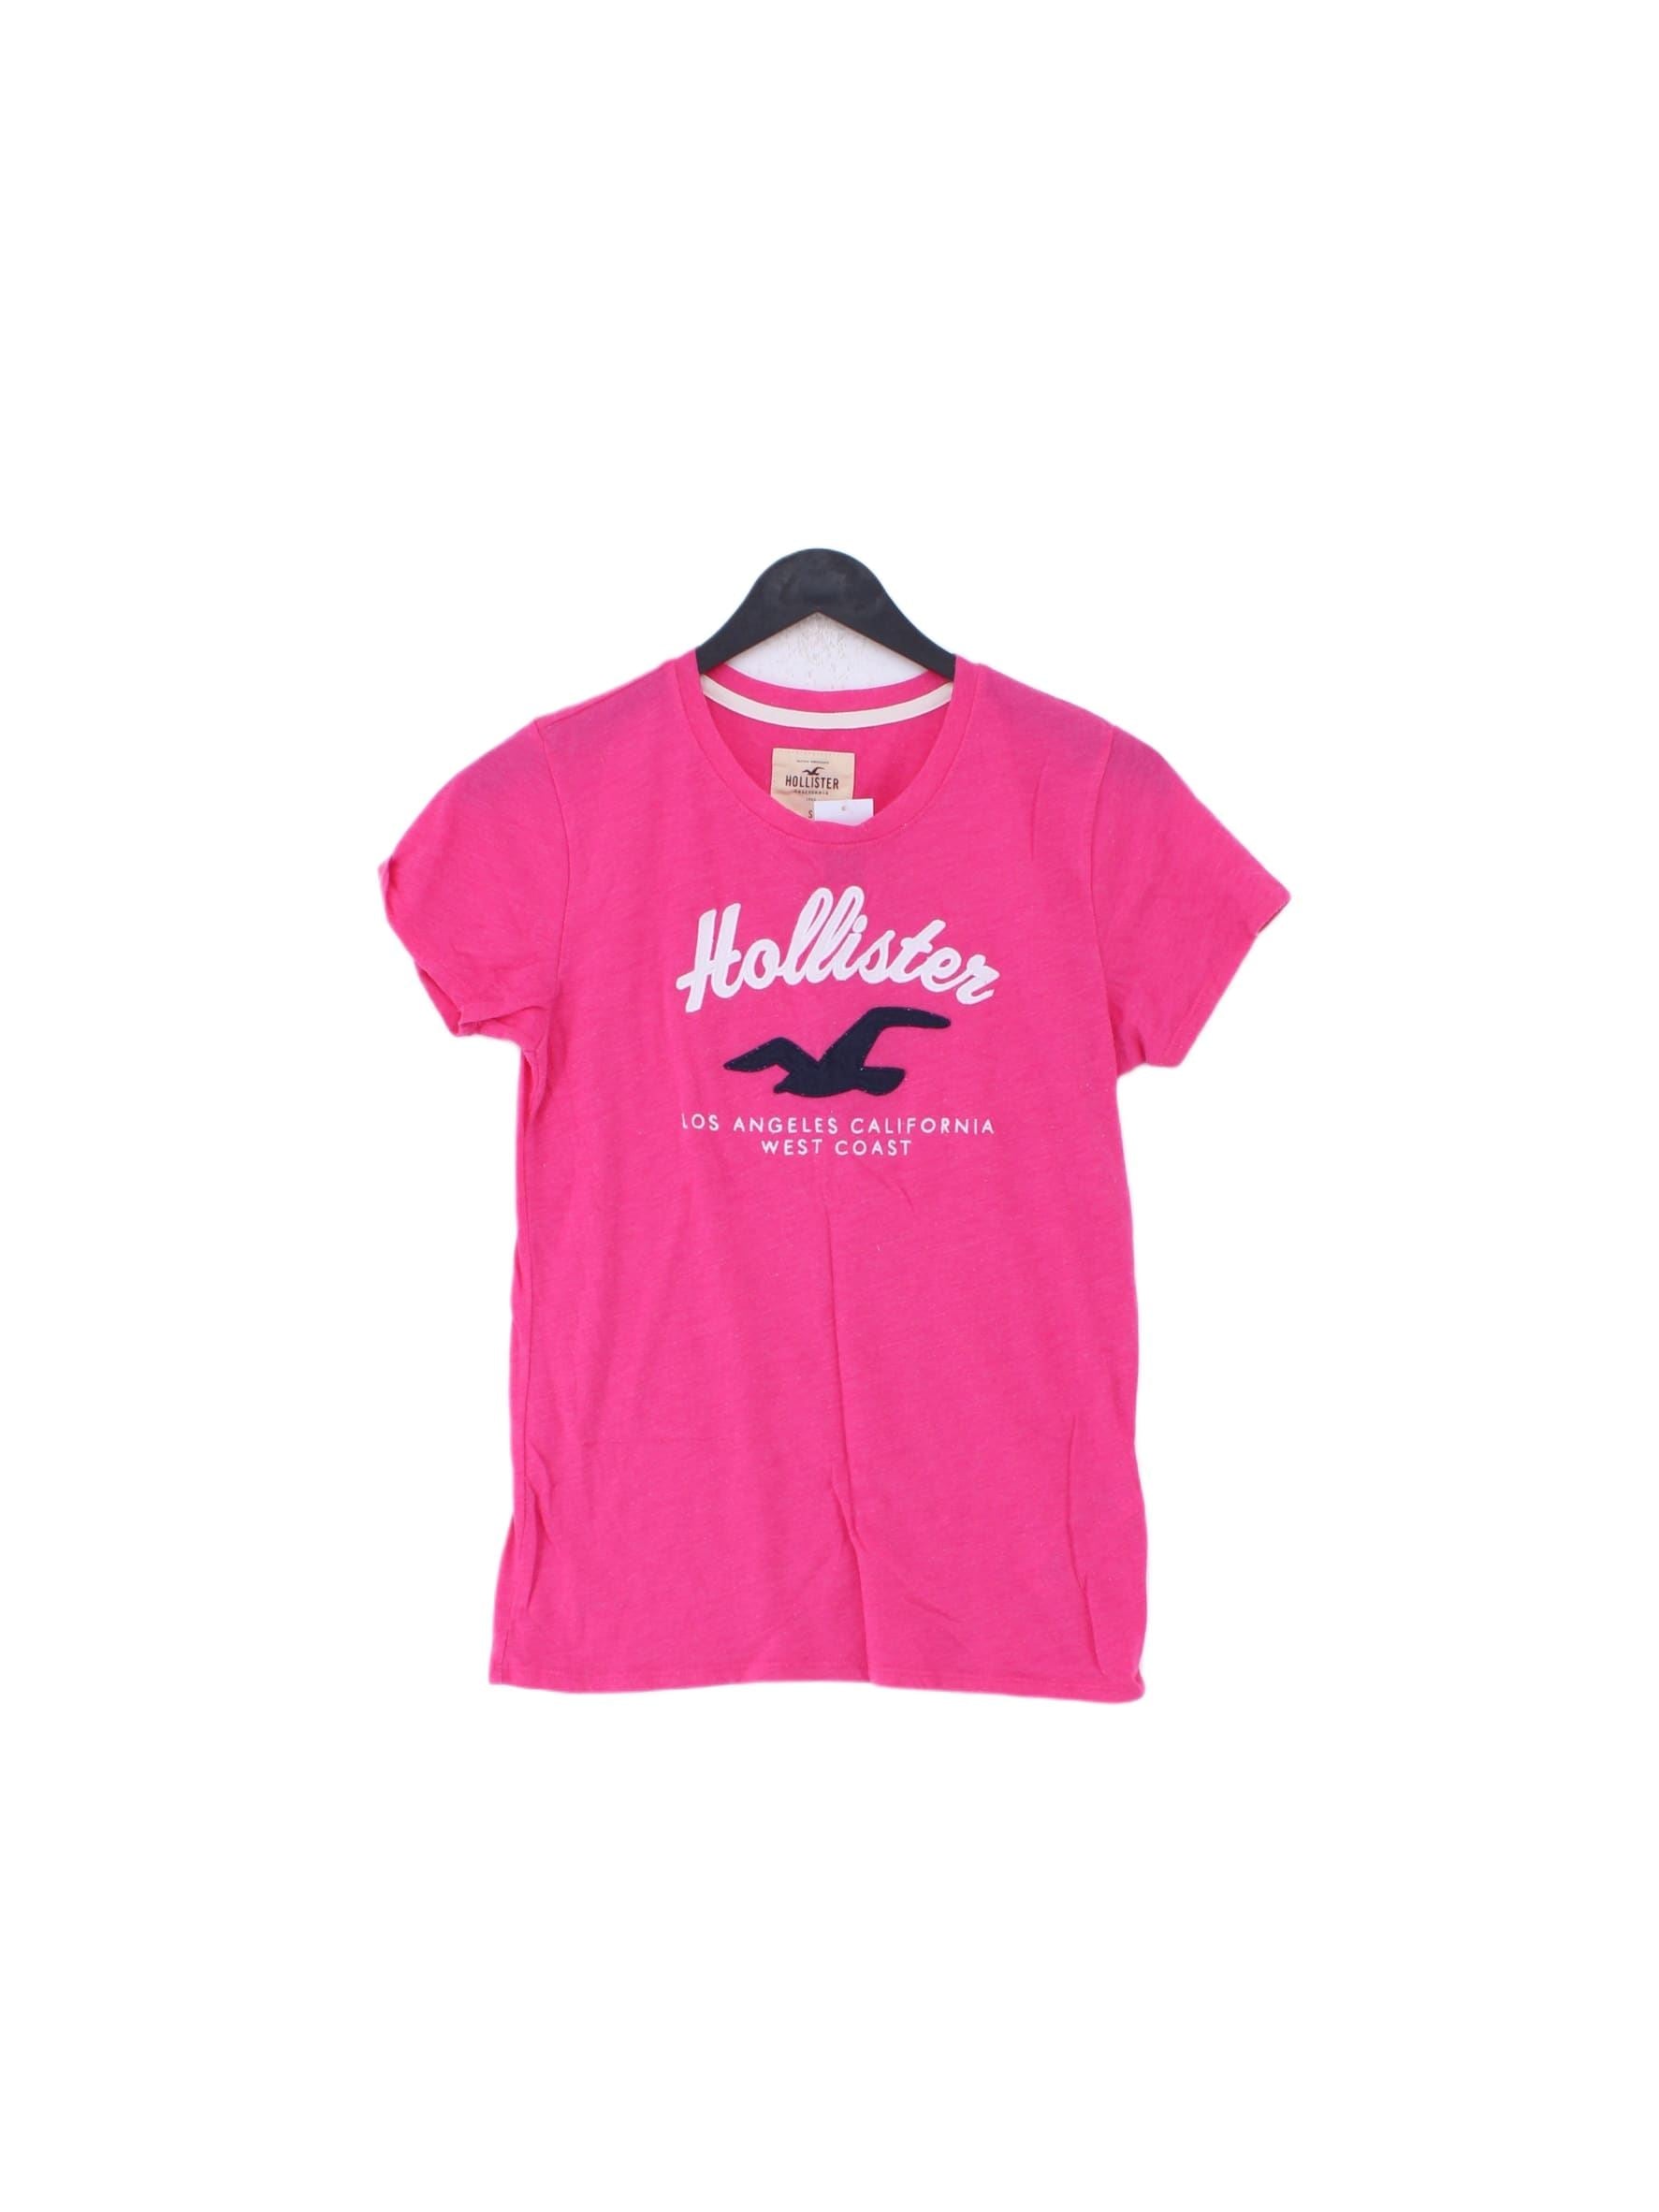 Hollister Women's T-Shirt S Pink Cotton with Polyester